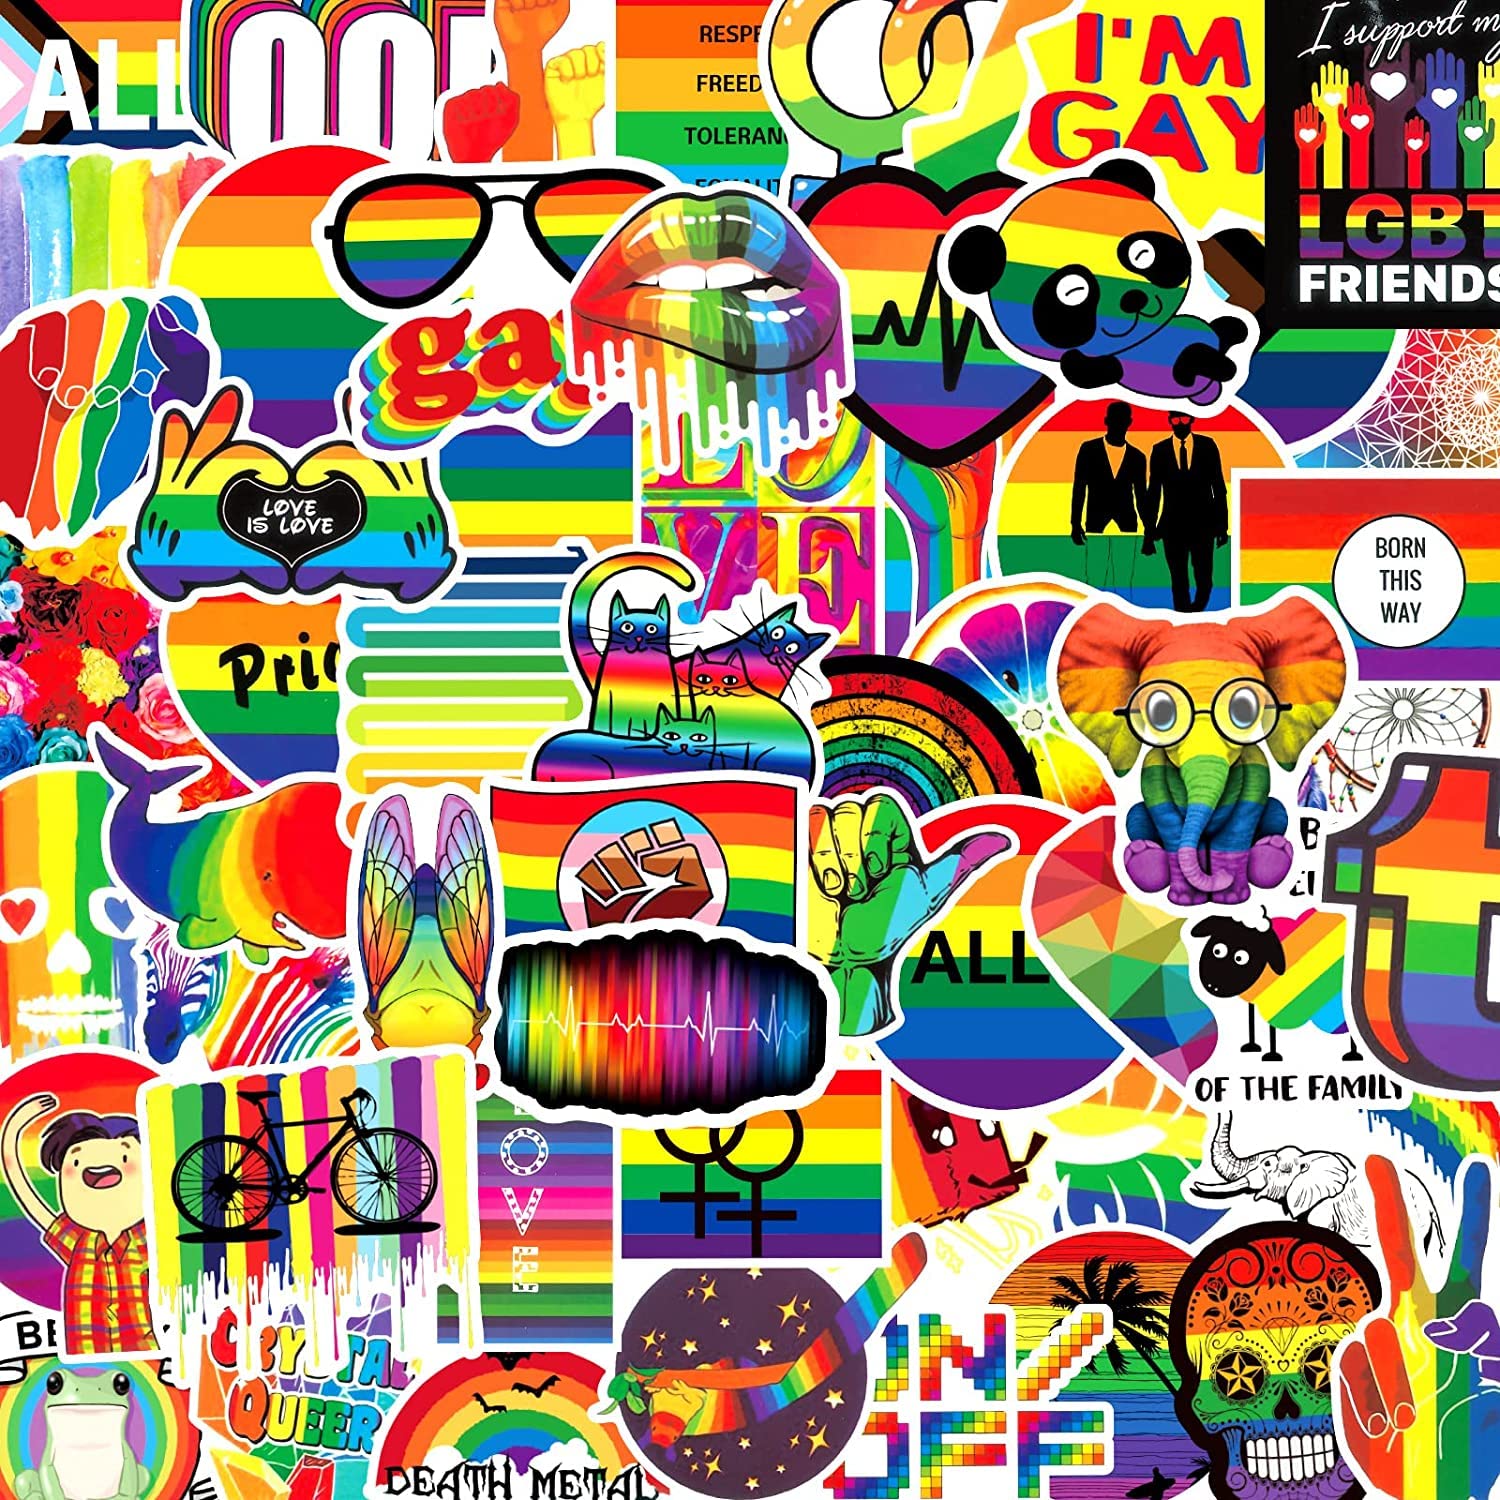 PCS Pride Stickers for LGBTQ, Gay Pride Rainbow Stickers Stuff for LGBT, Bisexual, Lesbian, Vinyl Waterproof Stickers for Water Bottle, Laptop, Skateboard, Phone, Guitar : Toys & Games